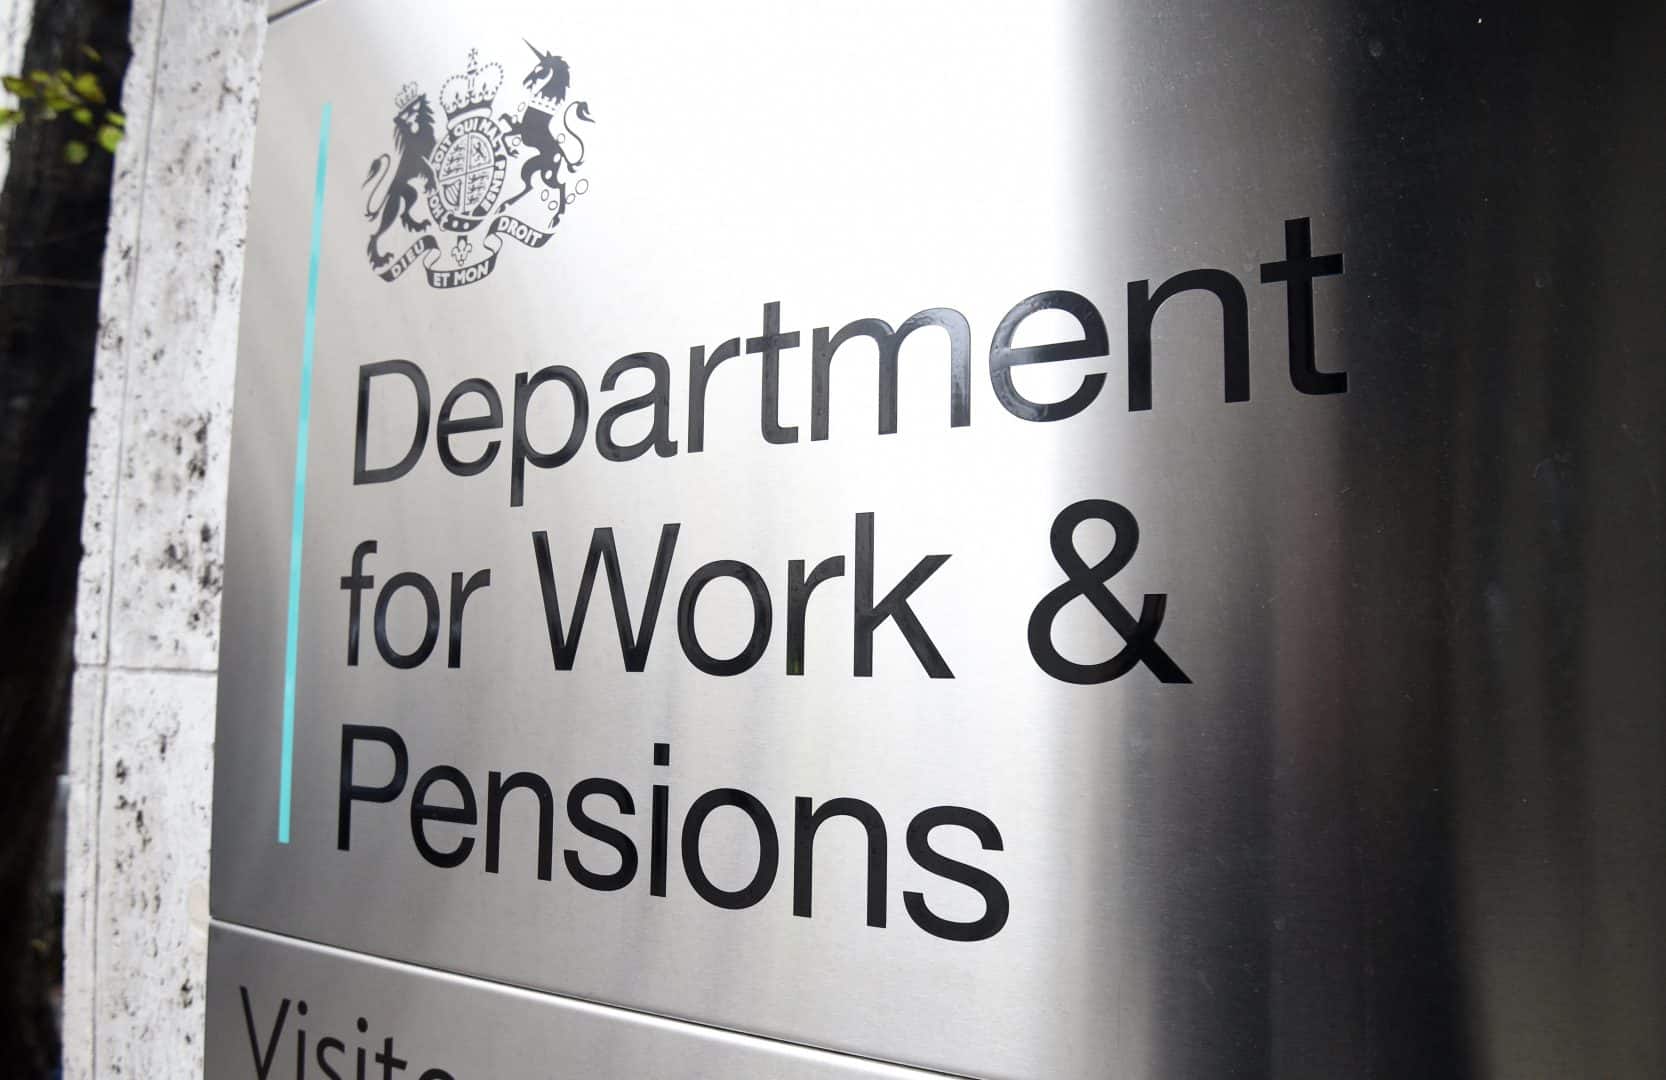 Covid-19: Almost 950,000 people apply for Universal Credit in two weeks